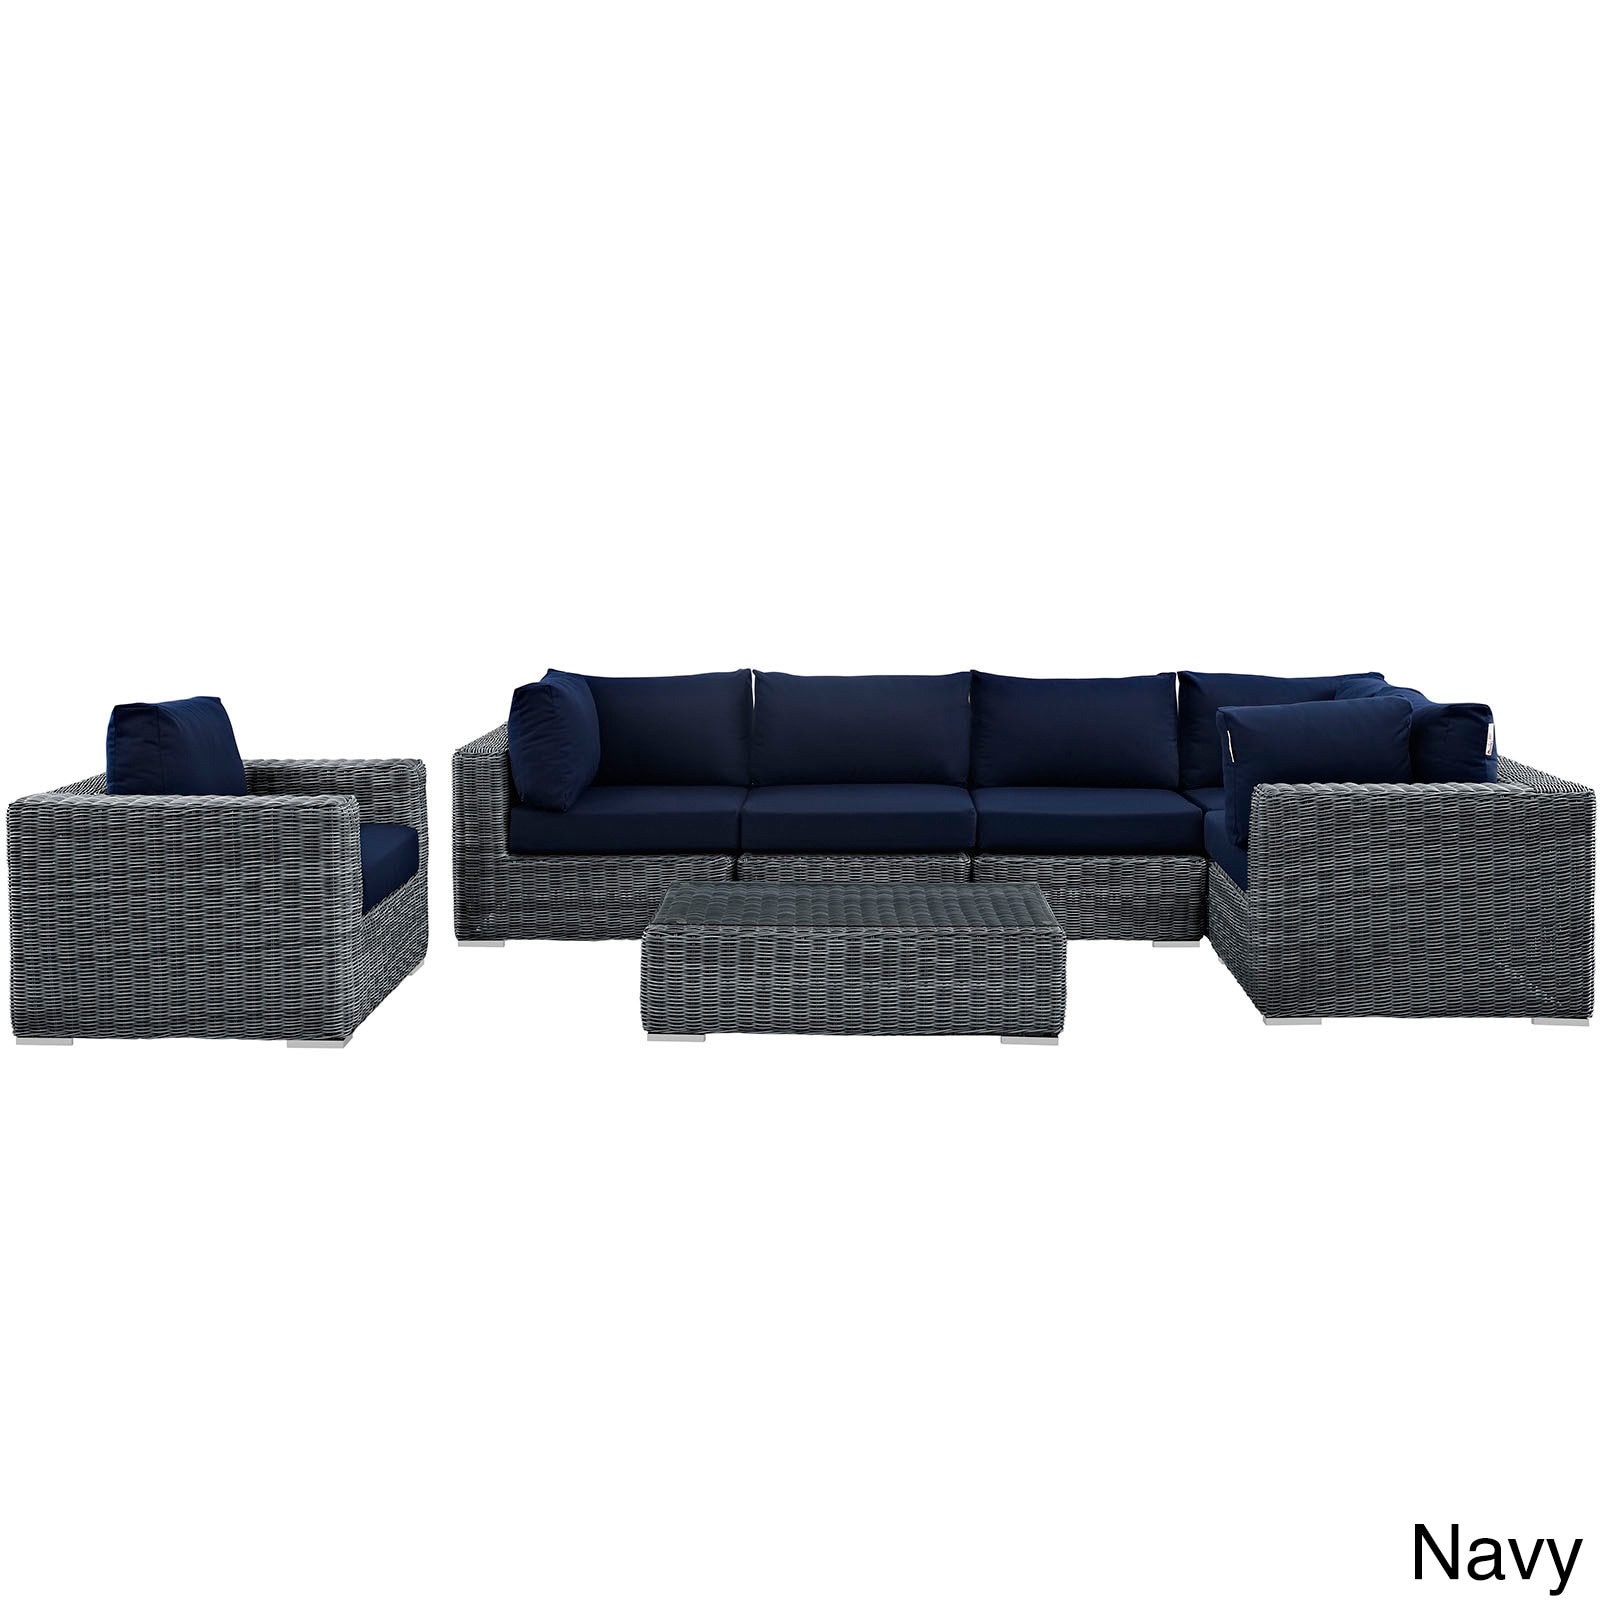 Invite Outdoor Patio 7-piece Sectional Set